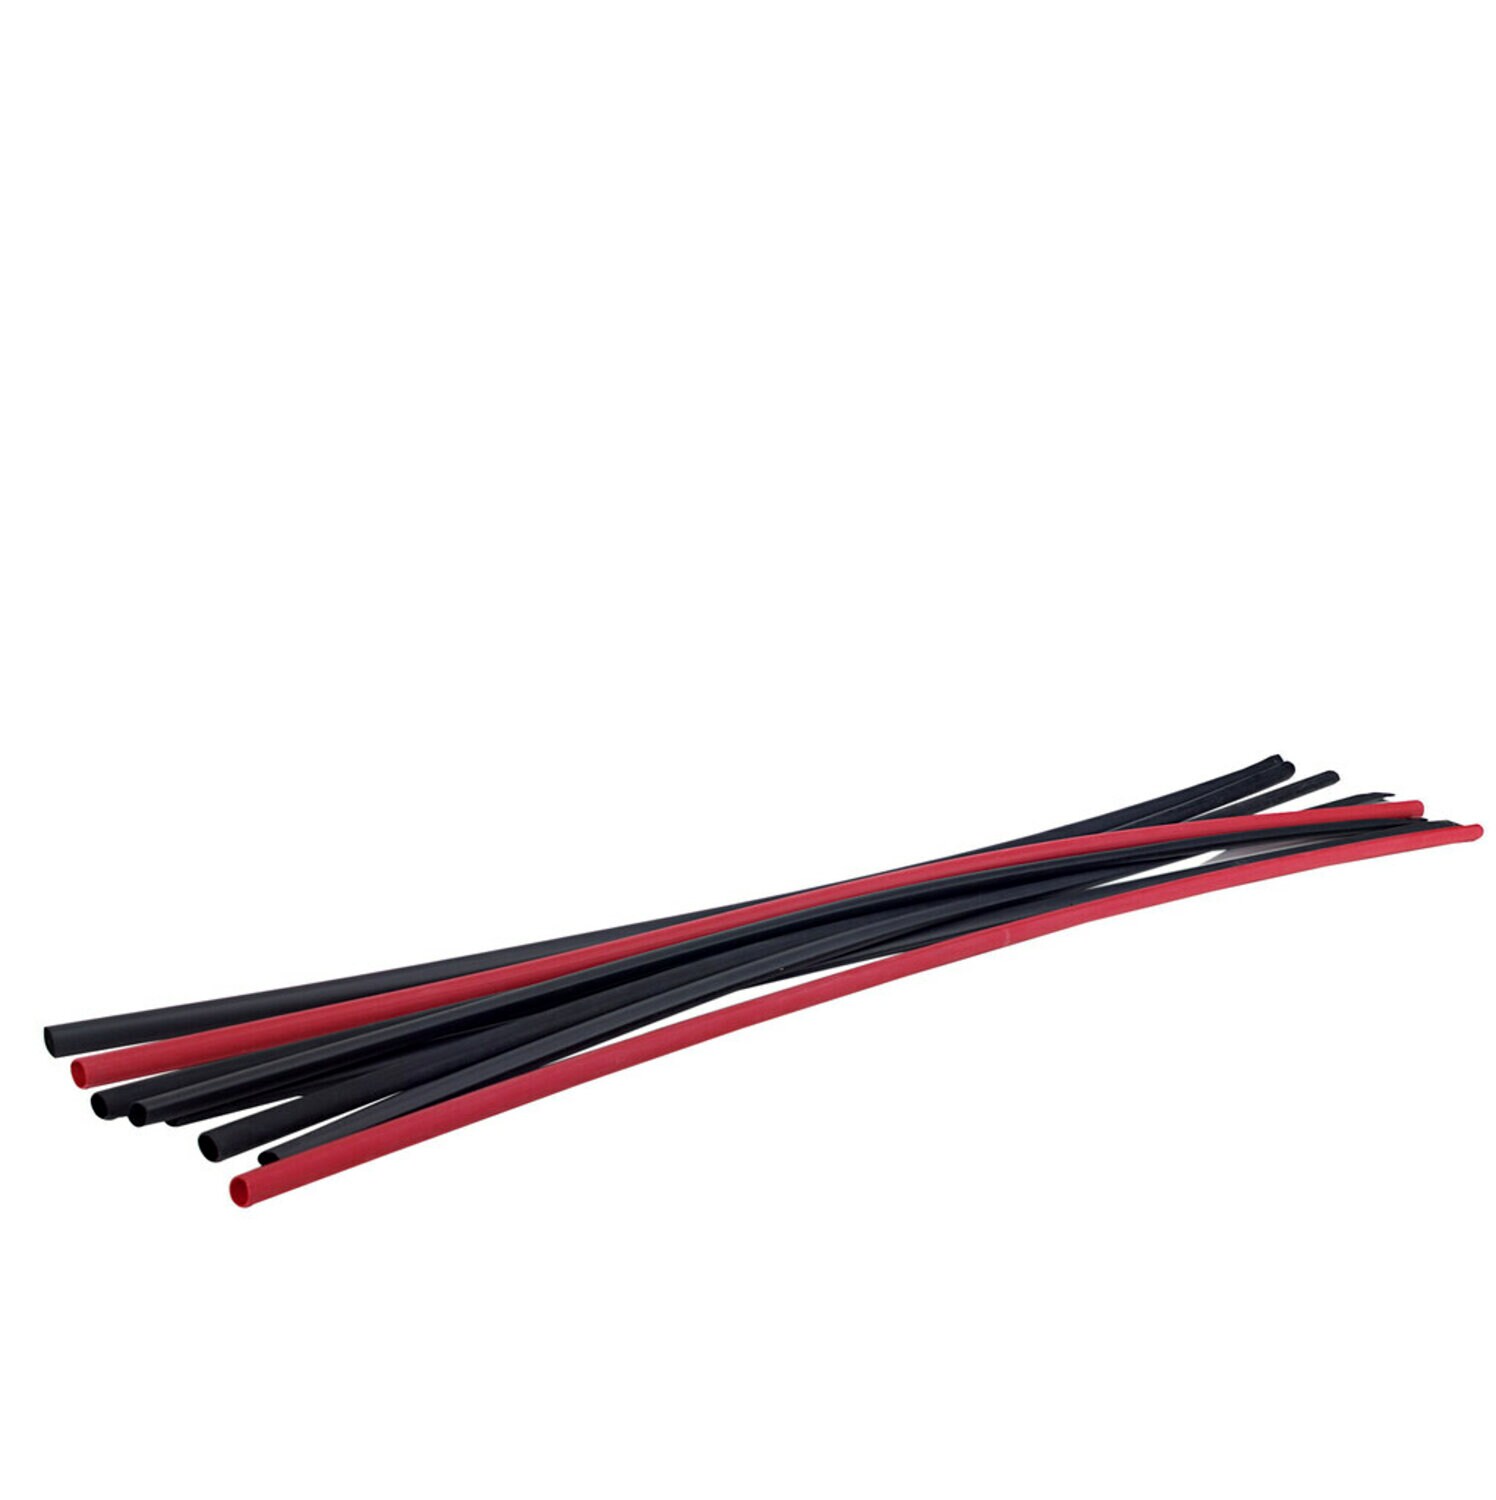 7000133563 - 3M Heat Shrink Thin-Wall Tubing FP-301-1/2-48"-Red-Hdr-12 Pcs, 48 in
Length sticks with header label, 12 pieces/case